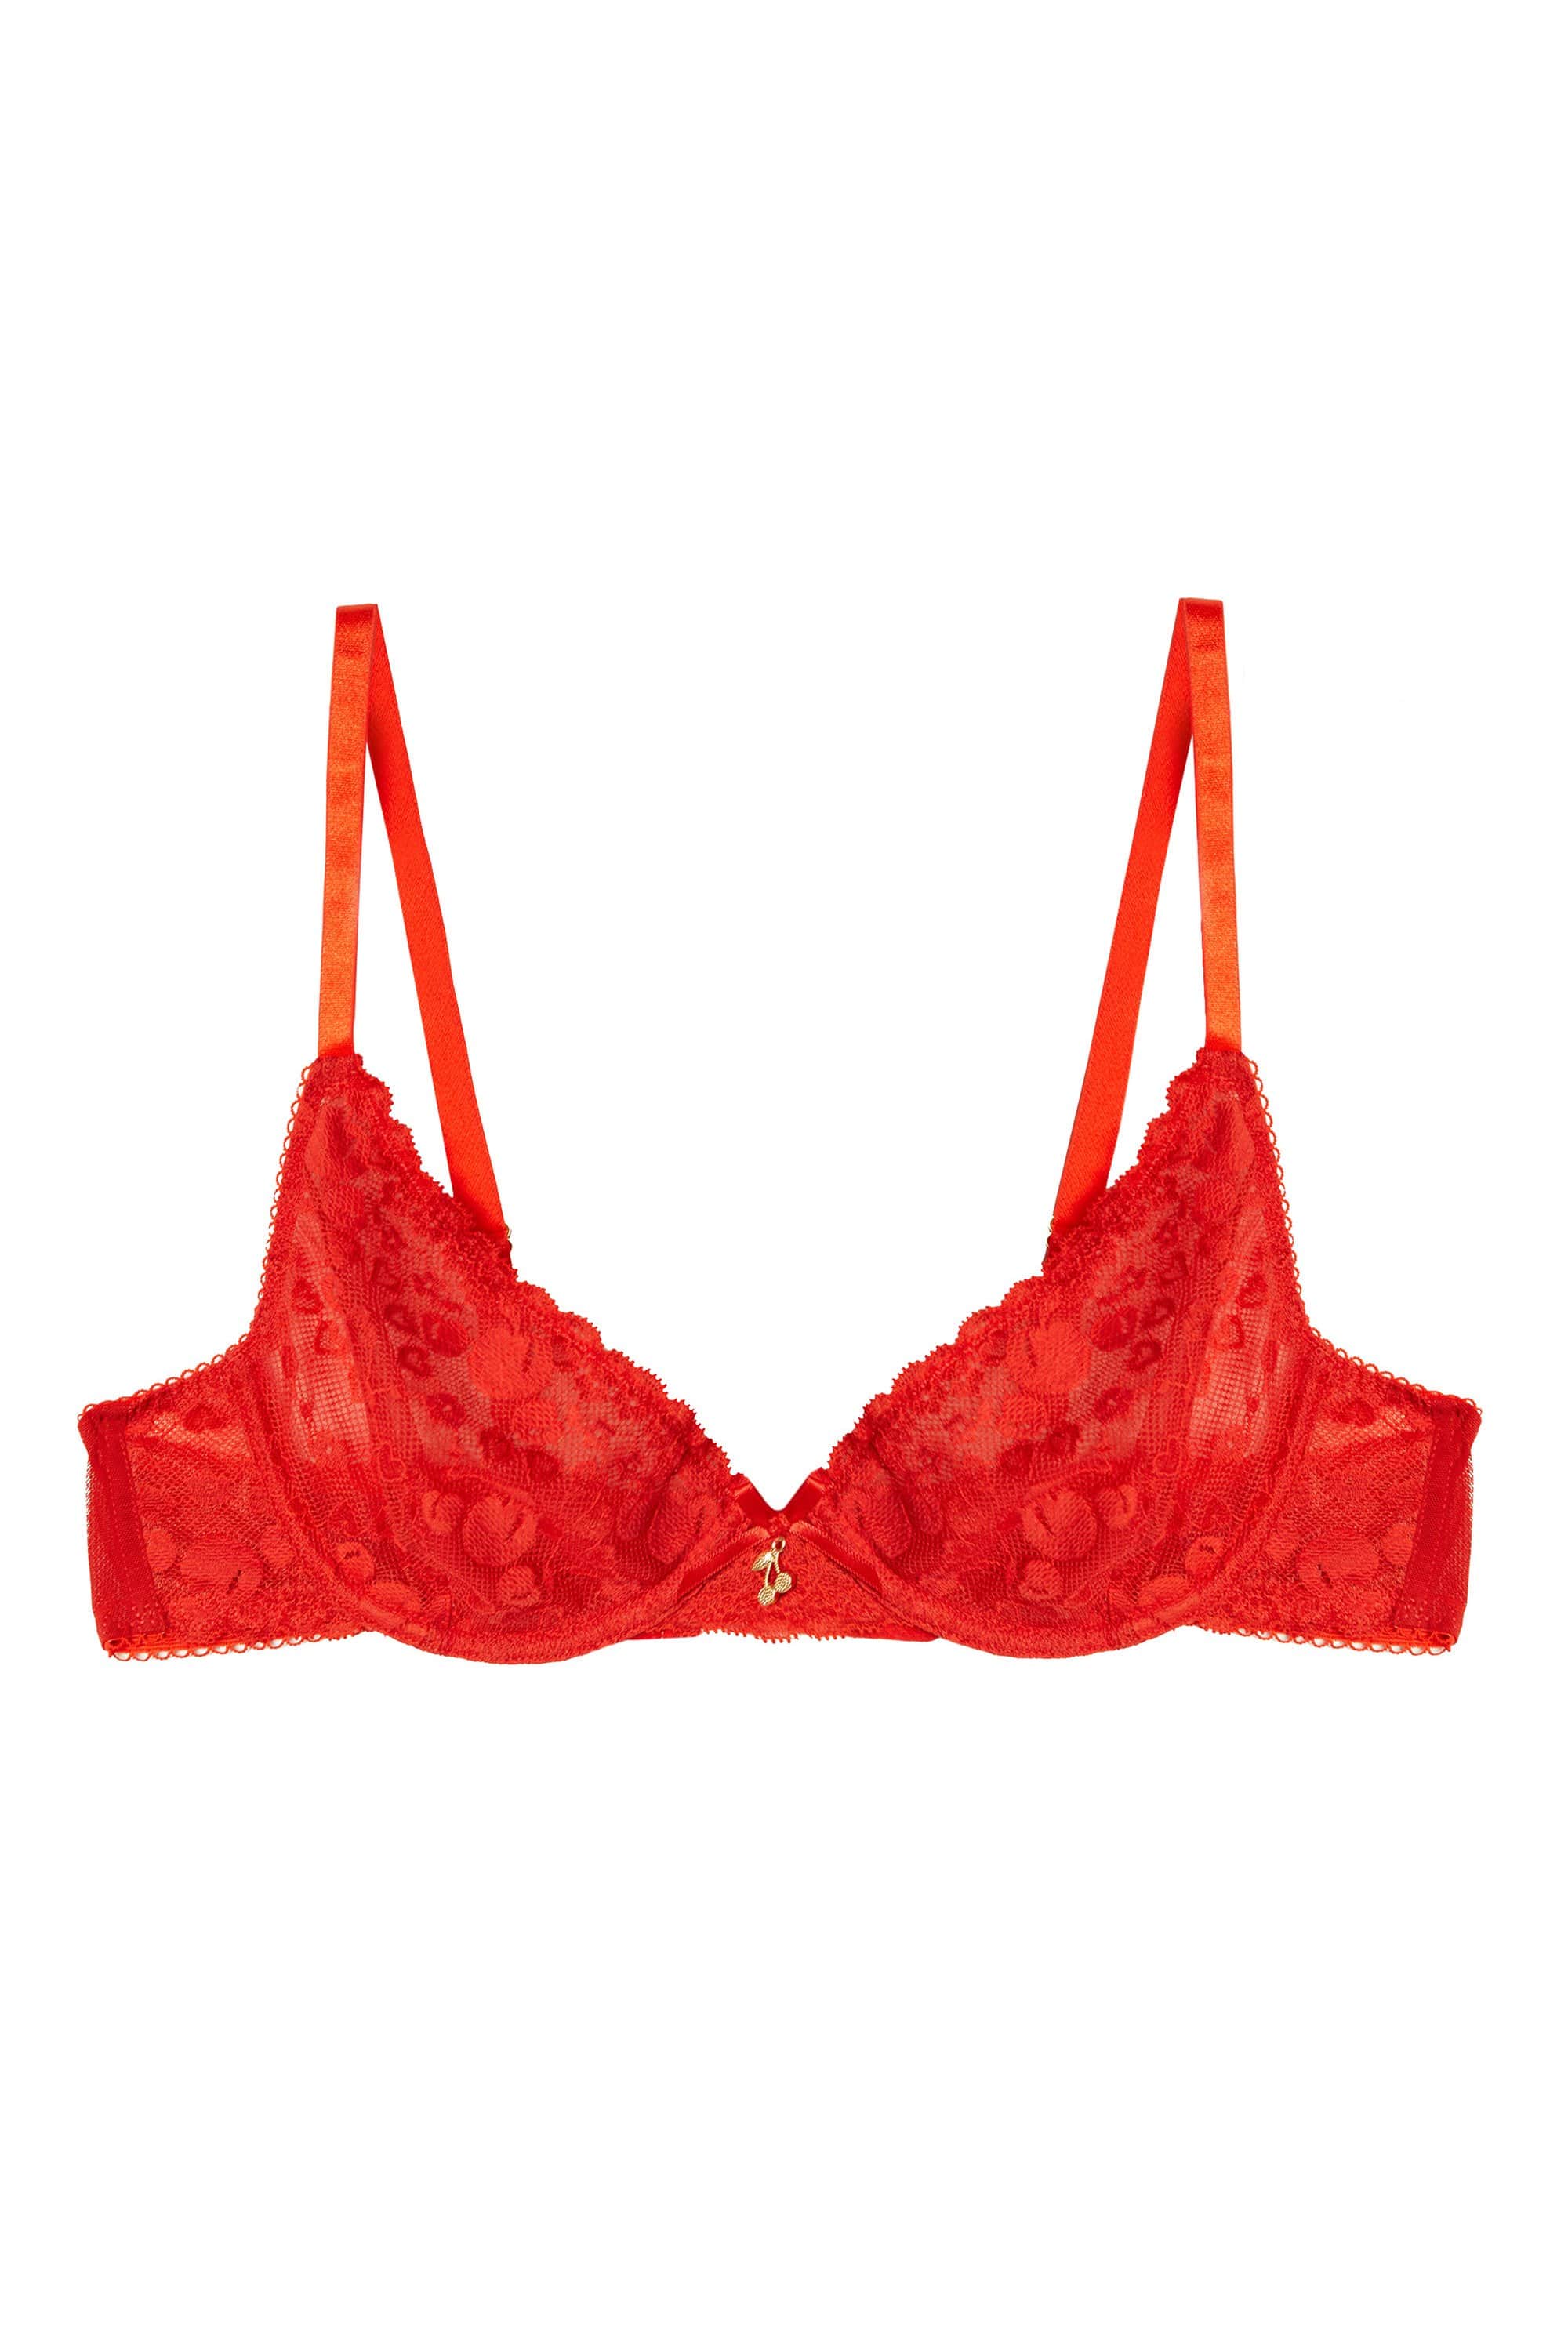 Amour Underwire Lace Bra Red/Cherry 36FF